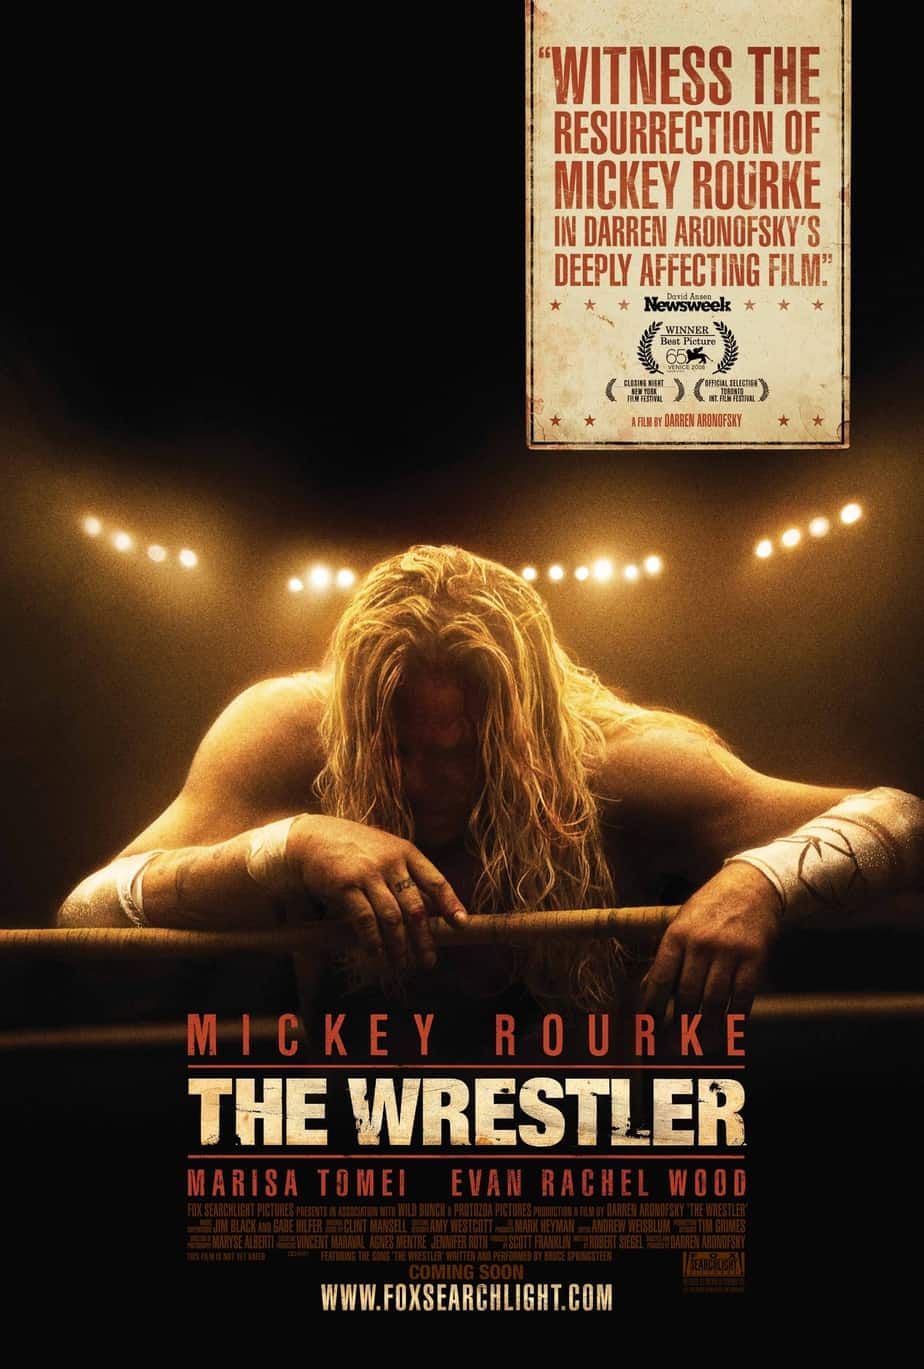 the wrestler movie poster with mickey rourke bending forward looking defeated